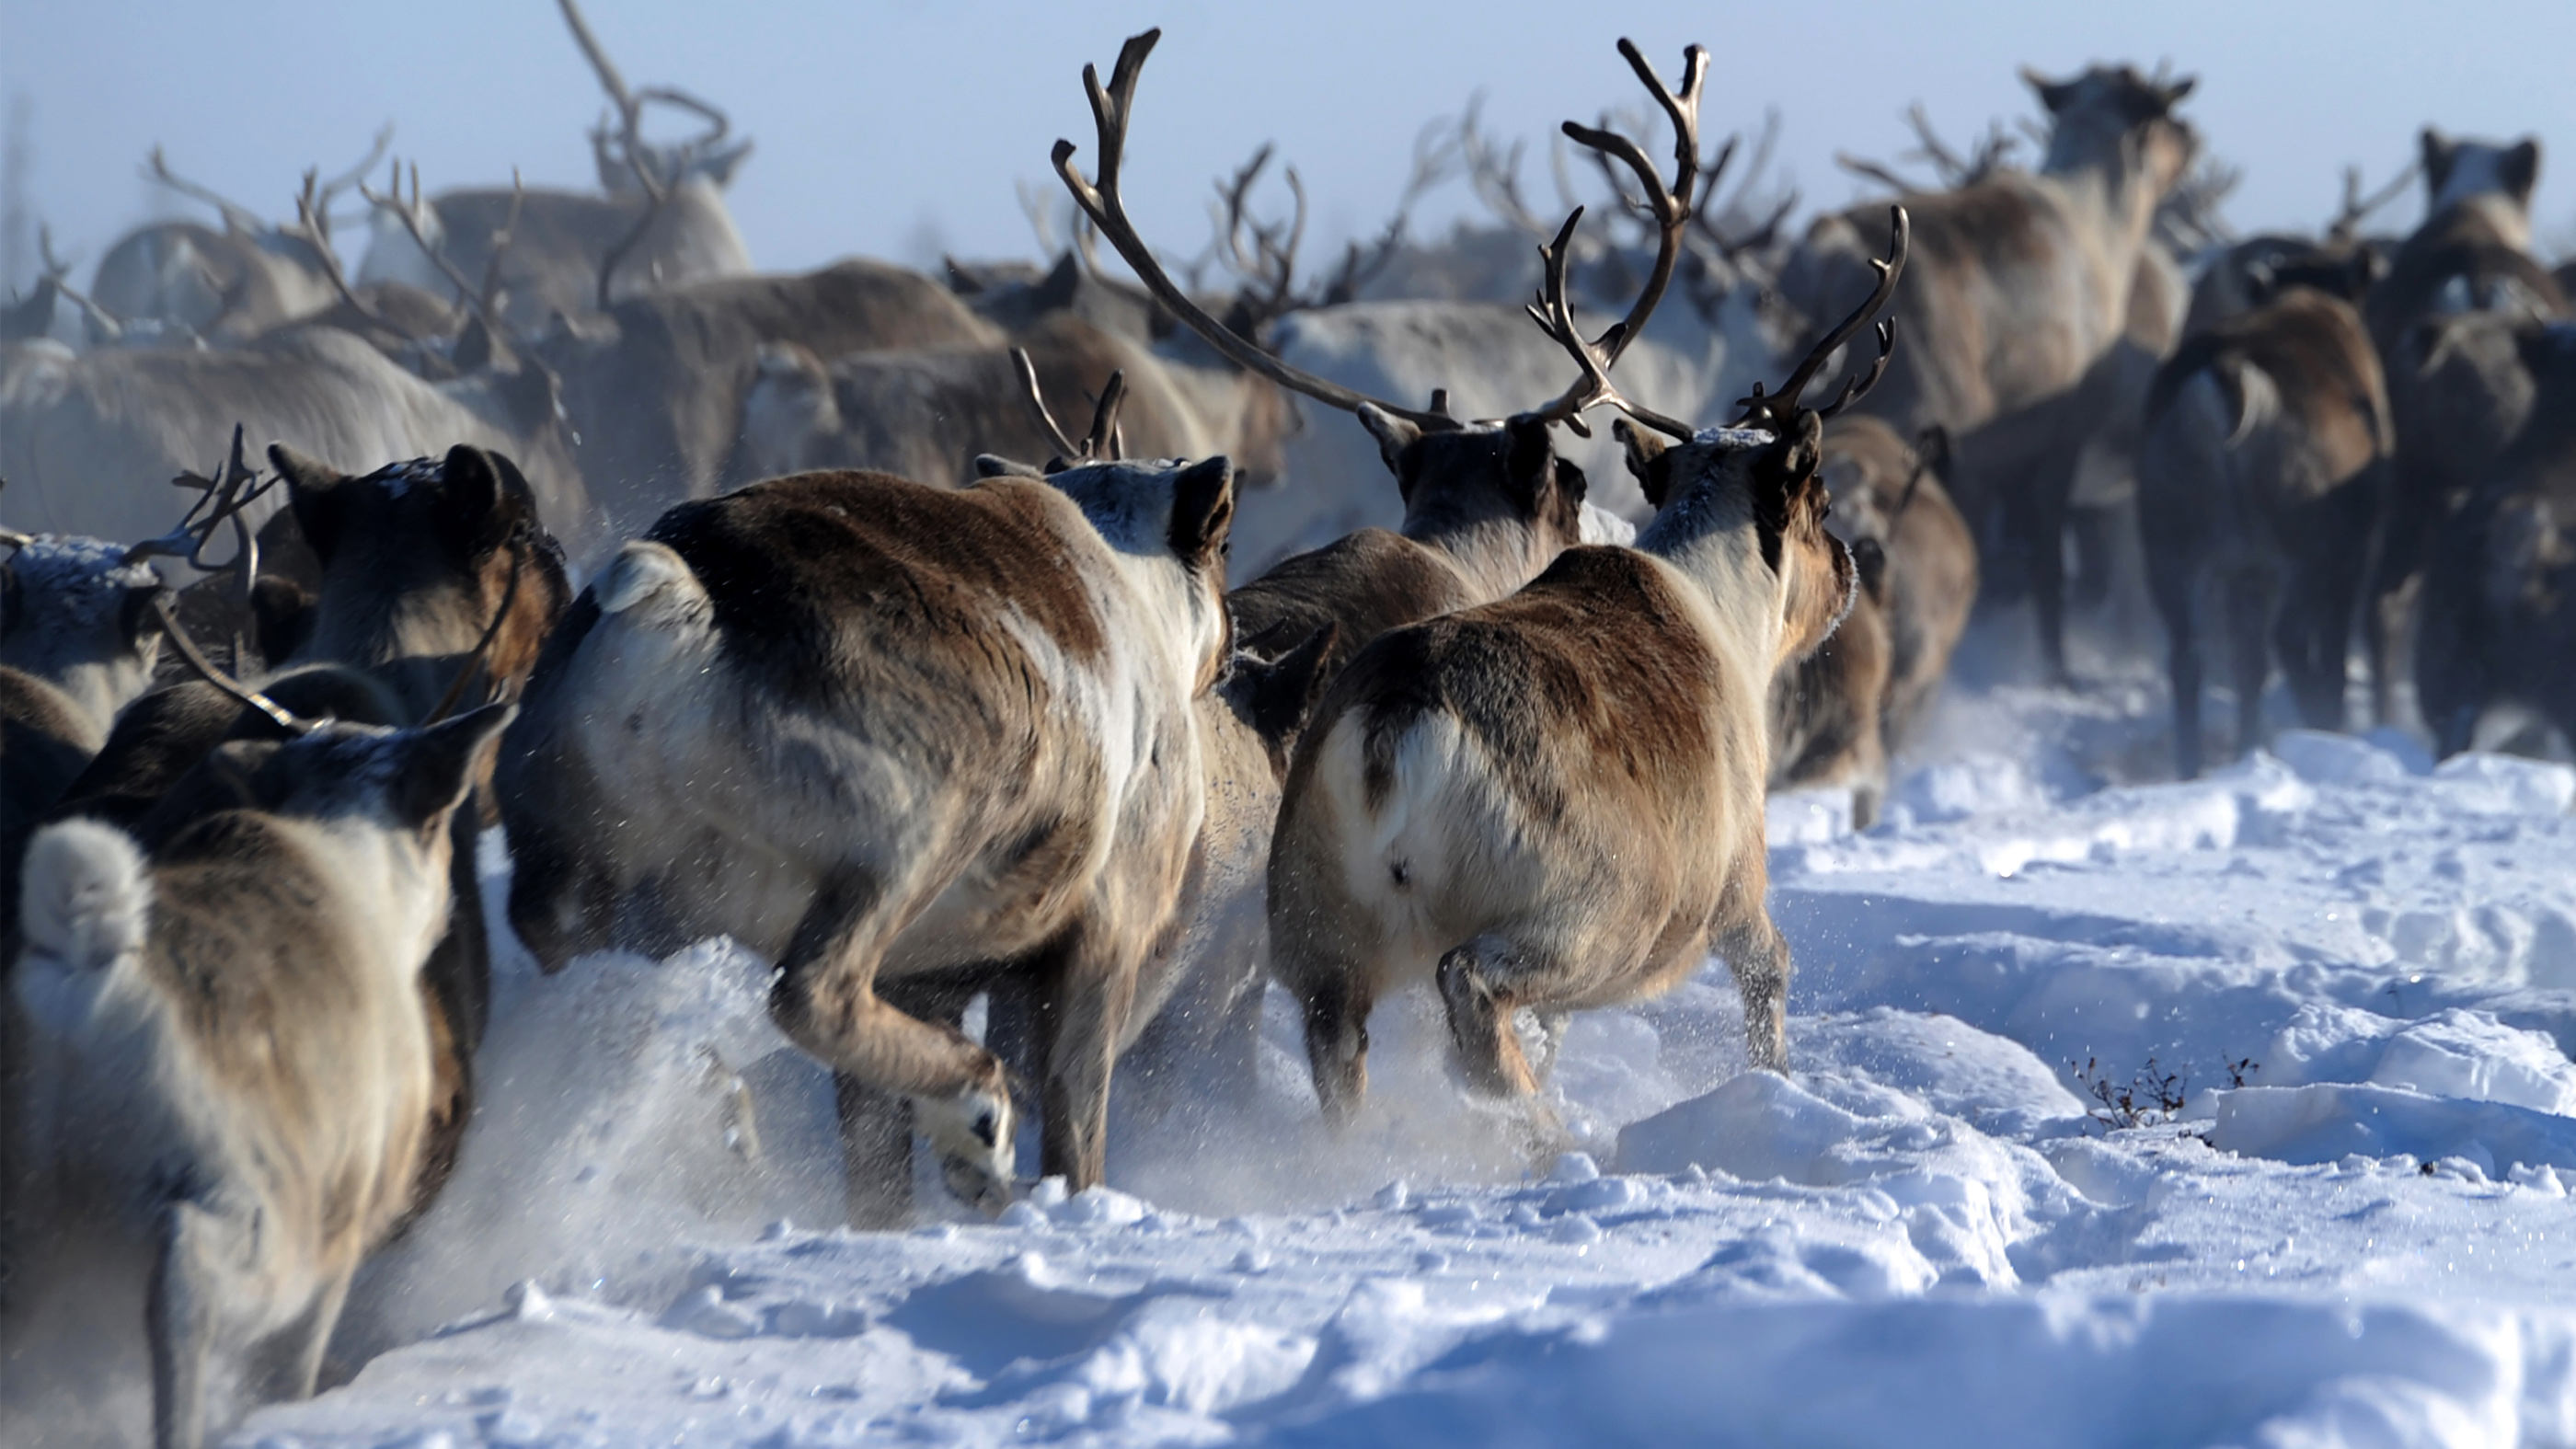 Reindeer and Caribou: Facts about majestic deer | Live Science